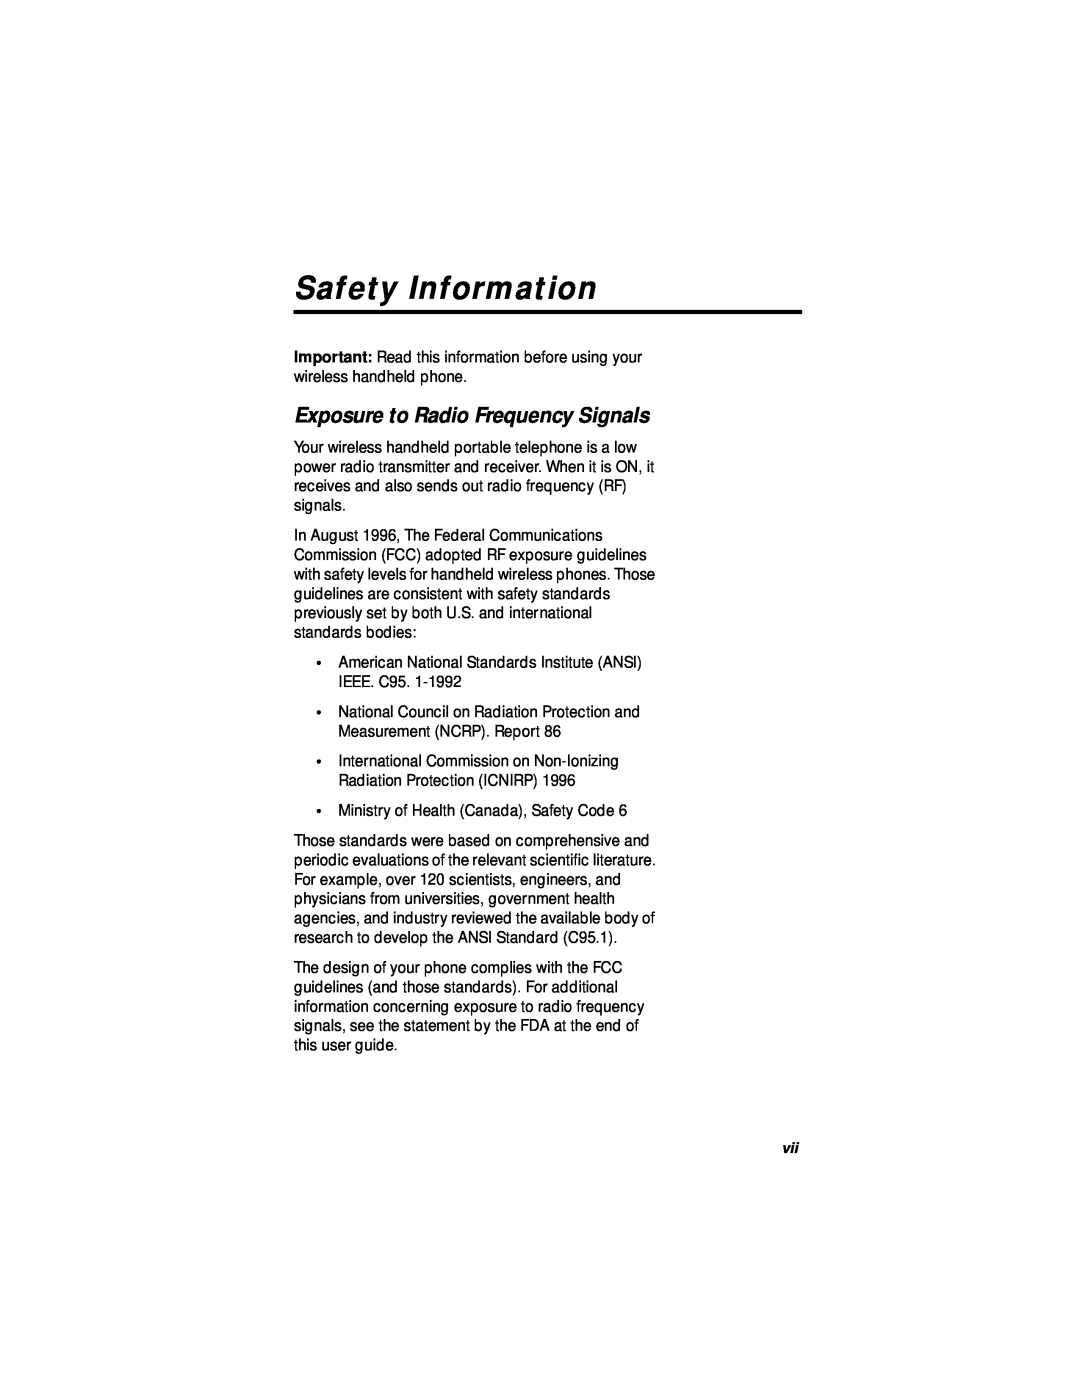 Motorola StarTAC specifications Safety Information, Exposure to Radio Frequency Signals 